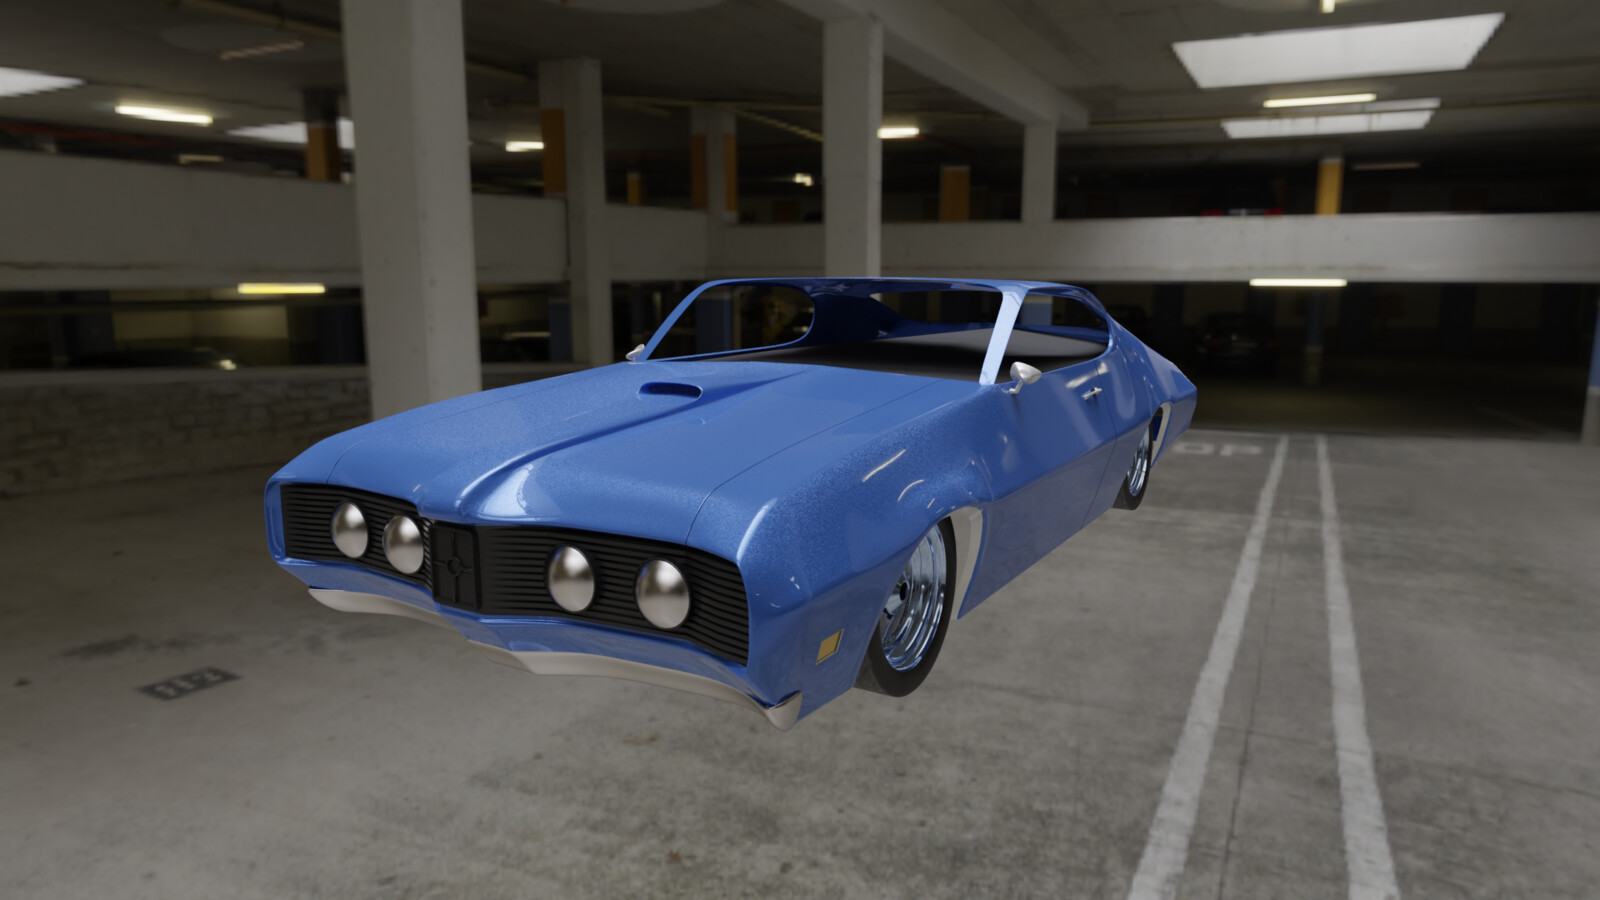 Final Blender project. 
Inspiration from various differently styled versions of the Mercury Cyclone CJ 